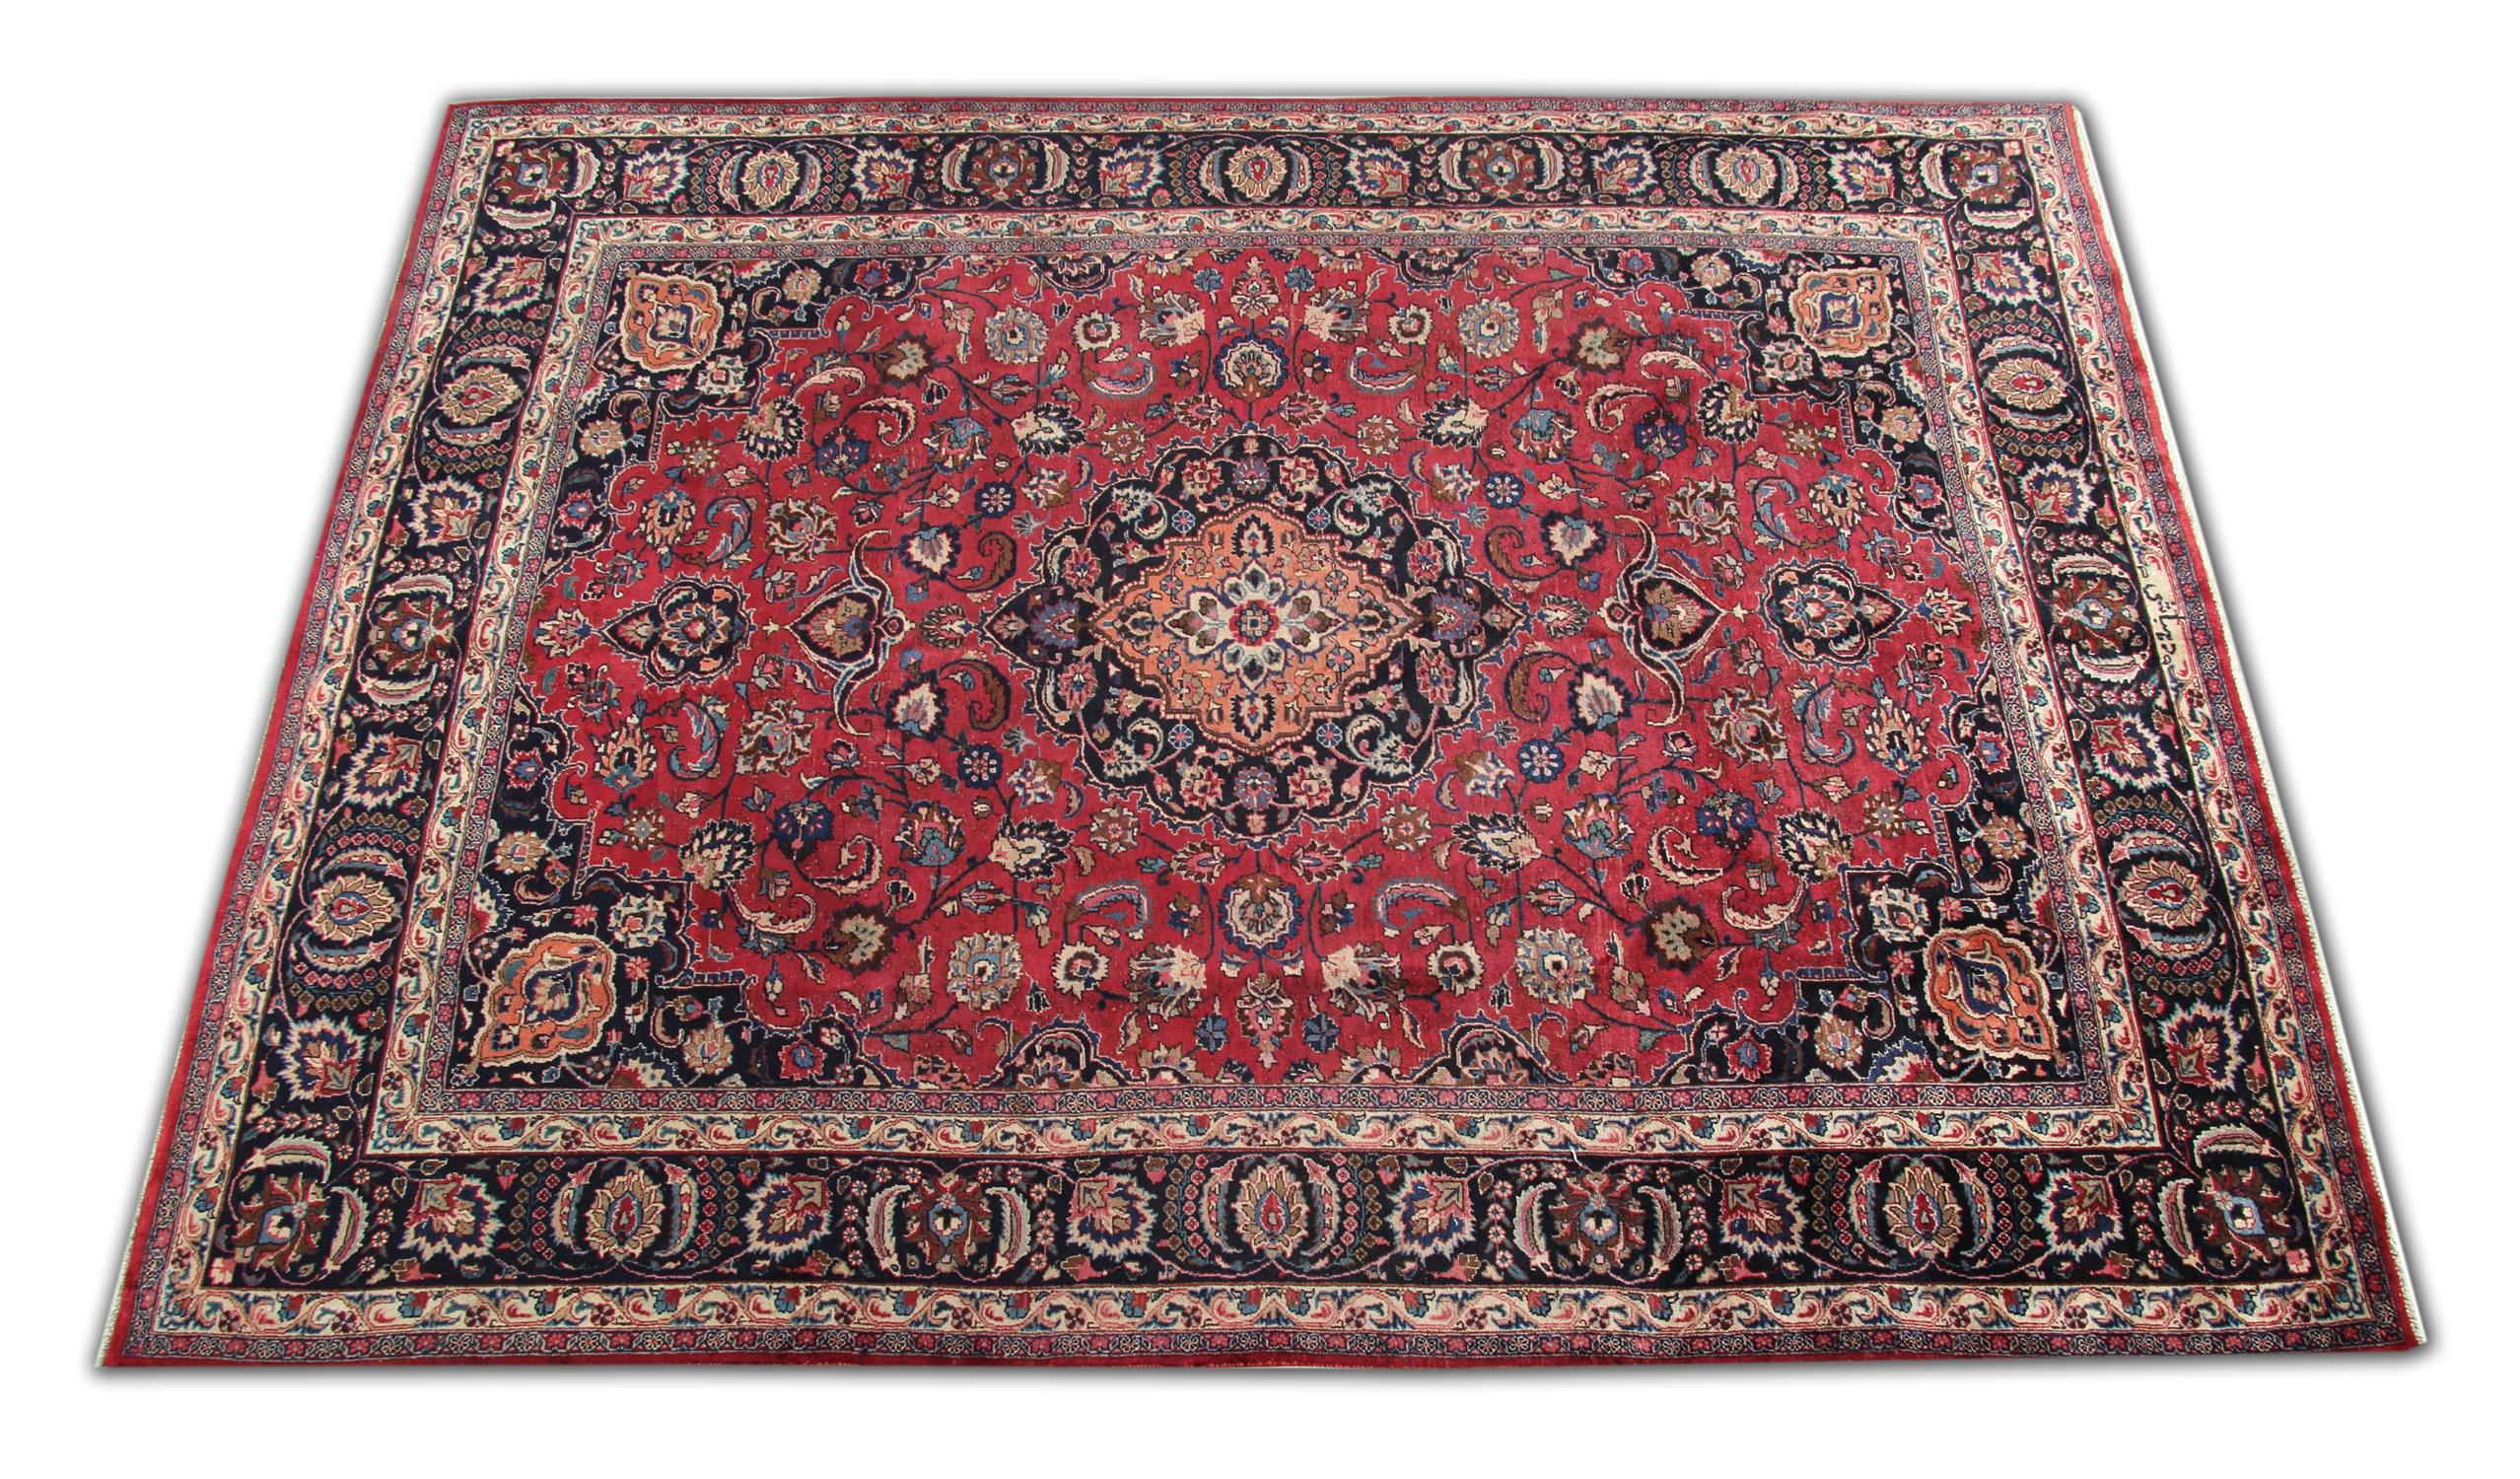 This elegant, rich red rug features a highly-detailed central medallion and surrounding design. It is decorated with a beautiful array of floral motifs woven symmetrically to create a decorative masterpiece. The enclosing border is woven on a